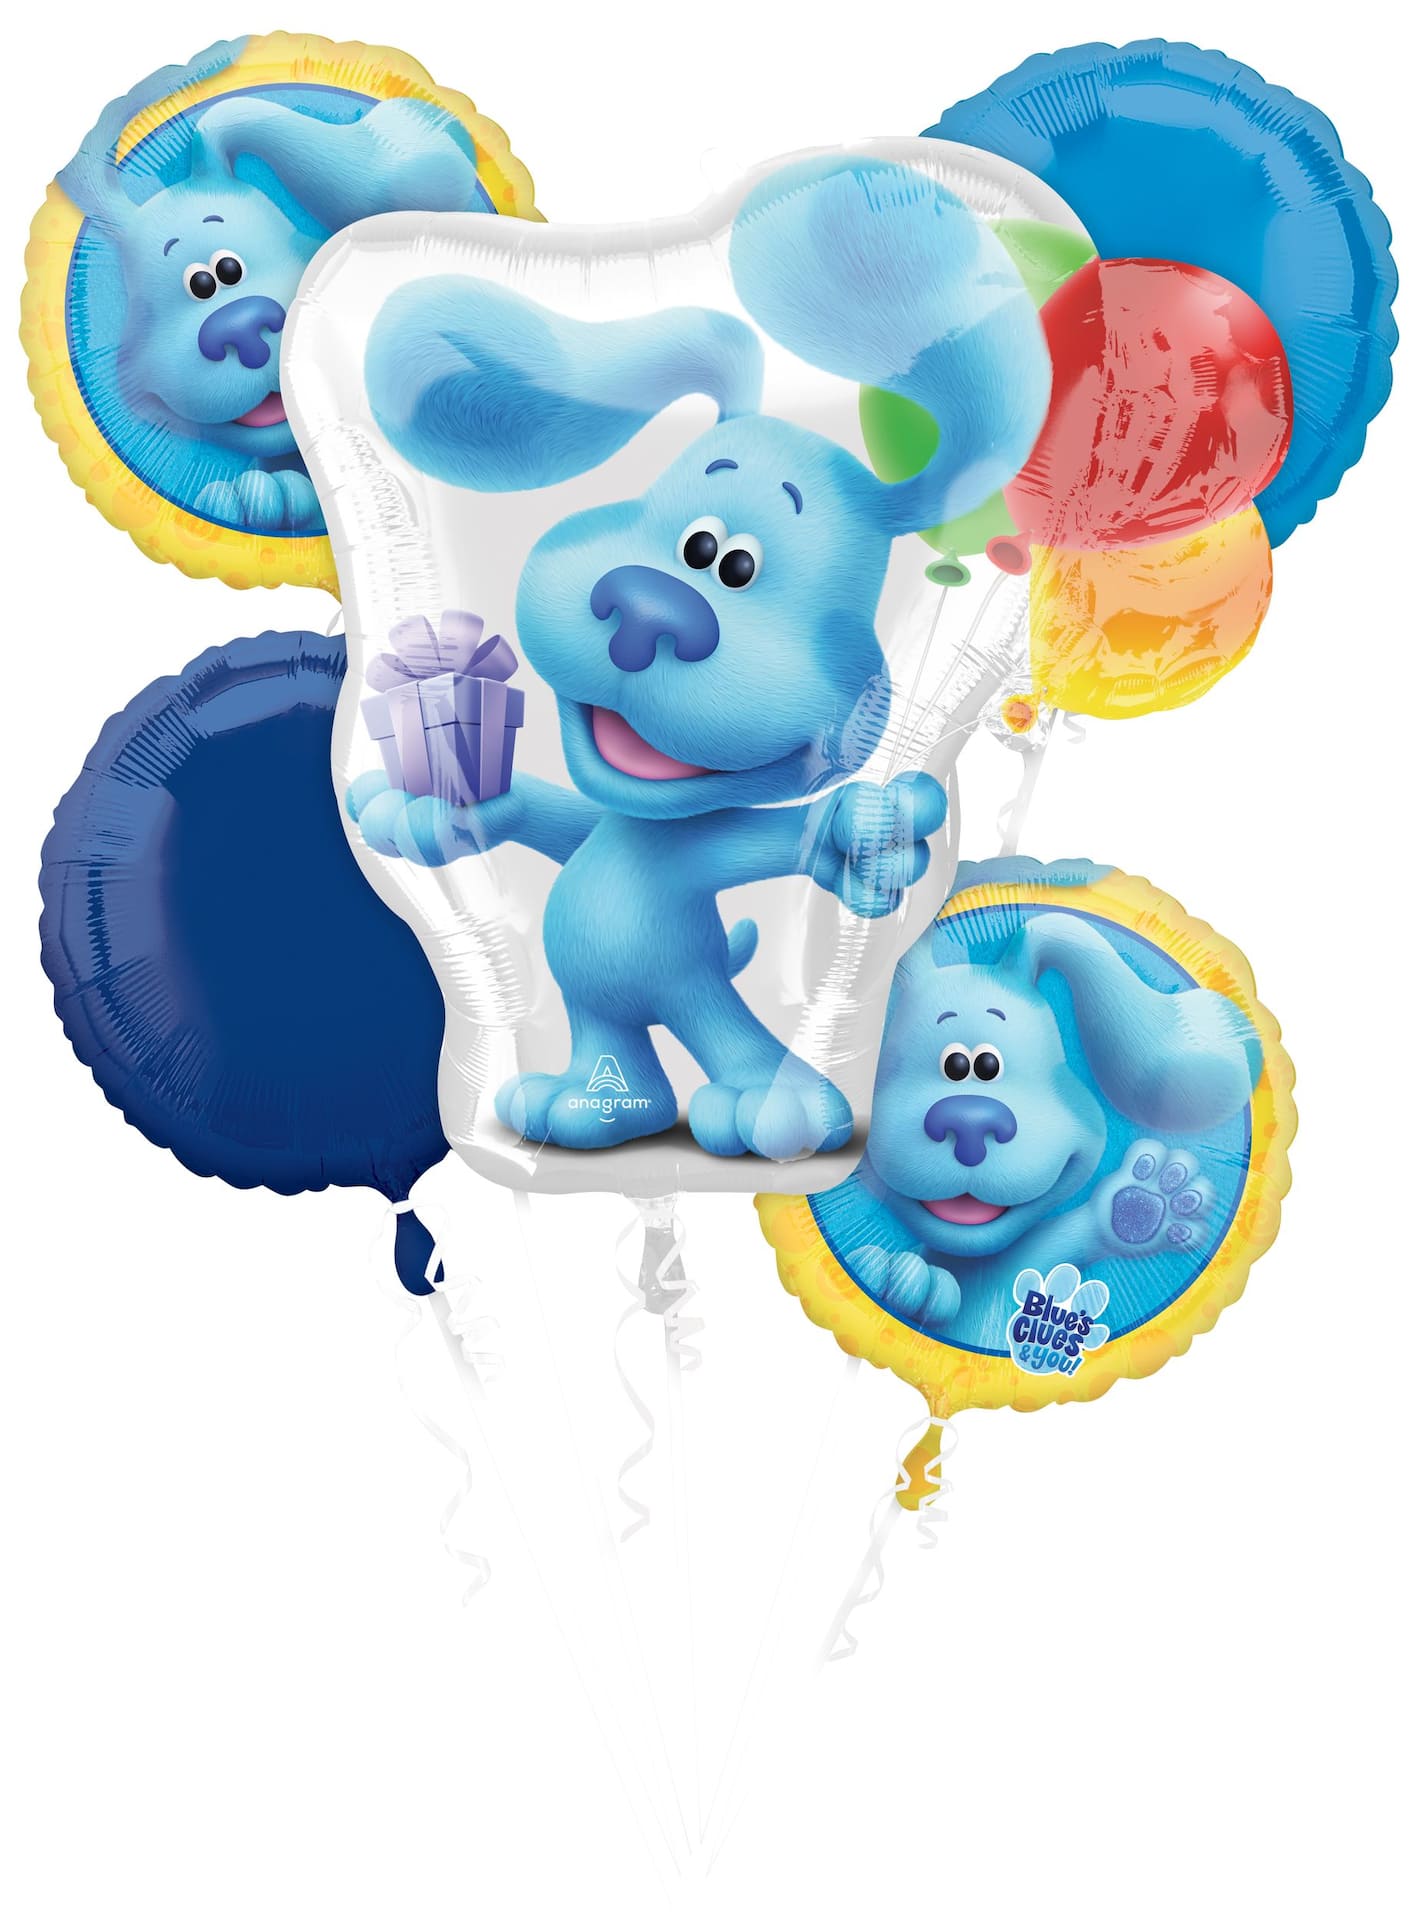 Nickelodeon Blue's Clues Round Satin Foil Balloon Bouquet, Blue, 5-pk,  Helium Inflation & Ribbon Included for Birthday Party